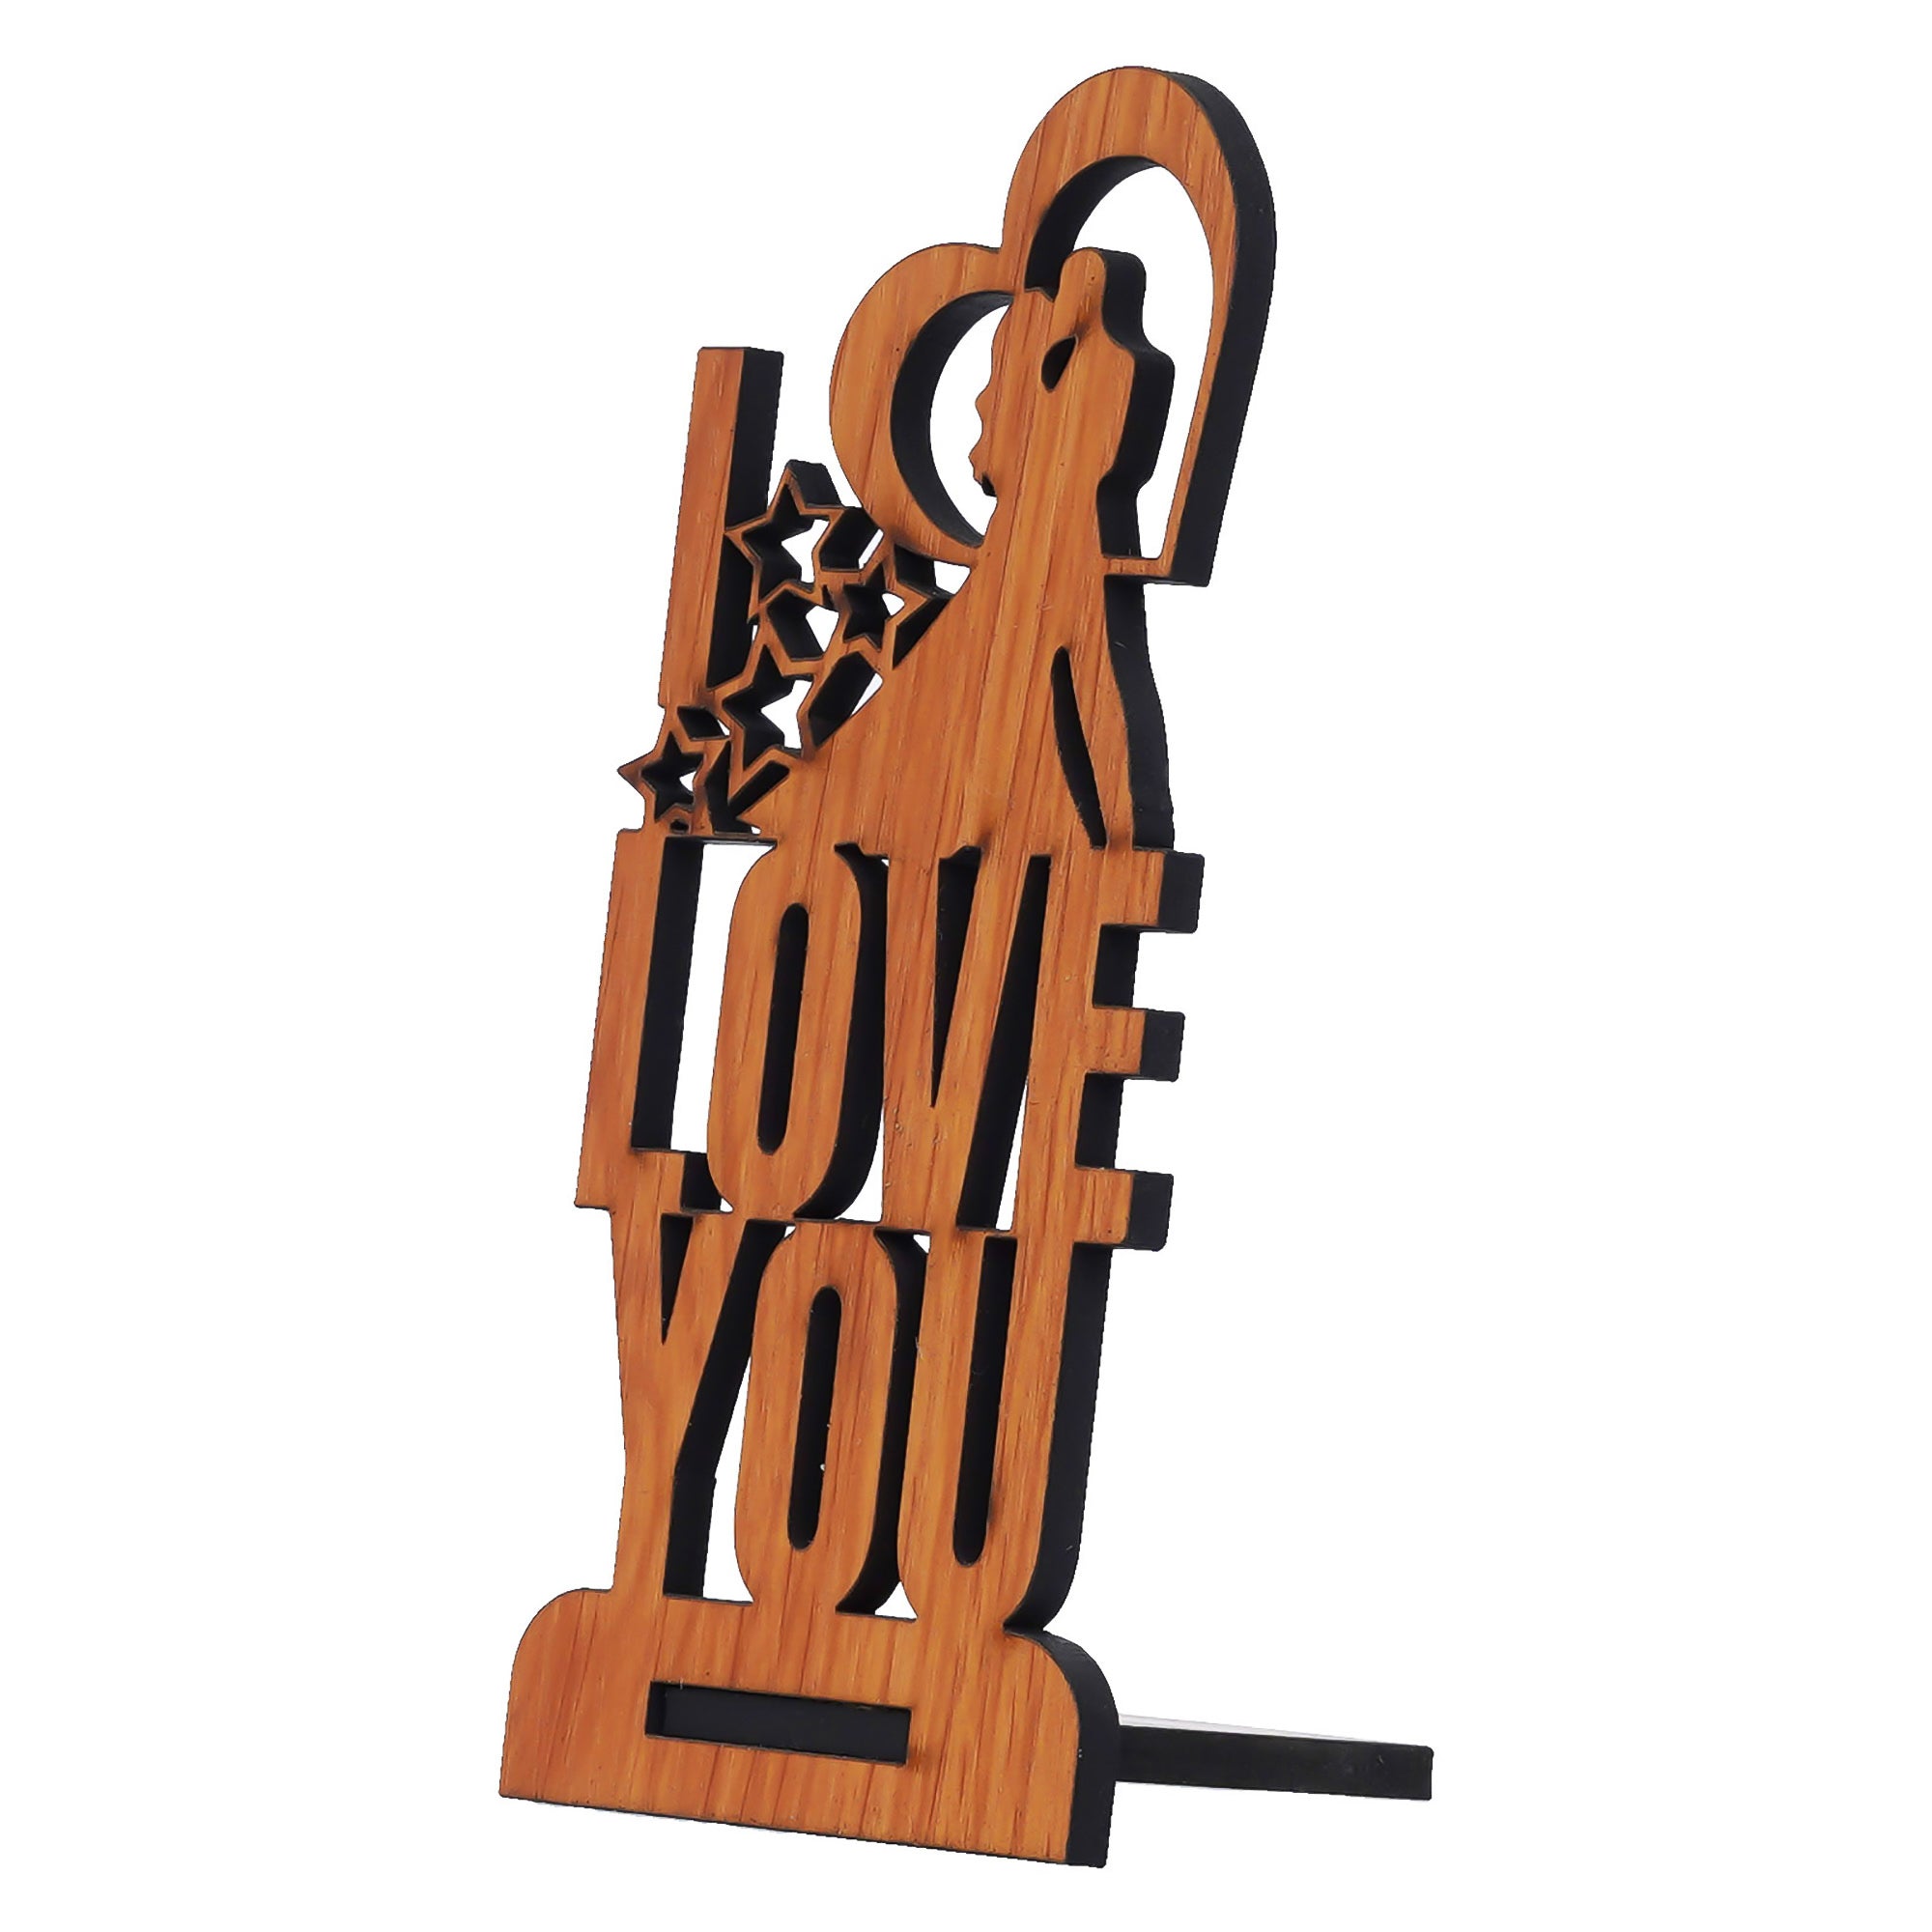 Valentine Combo of "Love You" Wooden Showpiece With Stand, Bride Kissing Groom Romantic Polyresin Decorative Showpiece 7